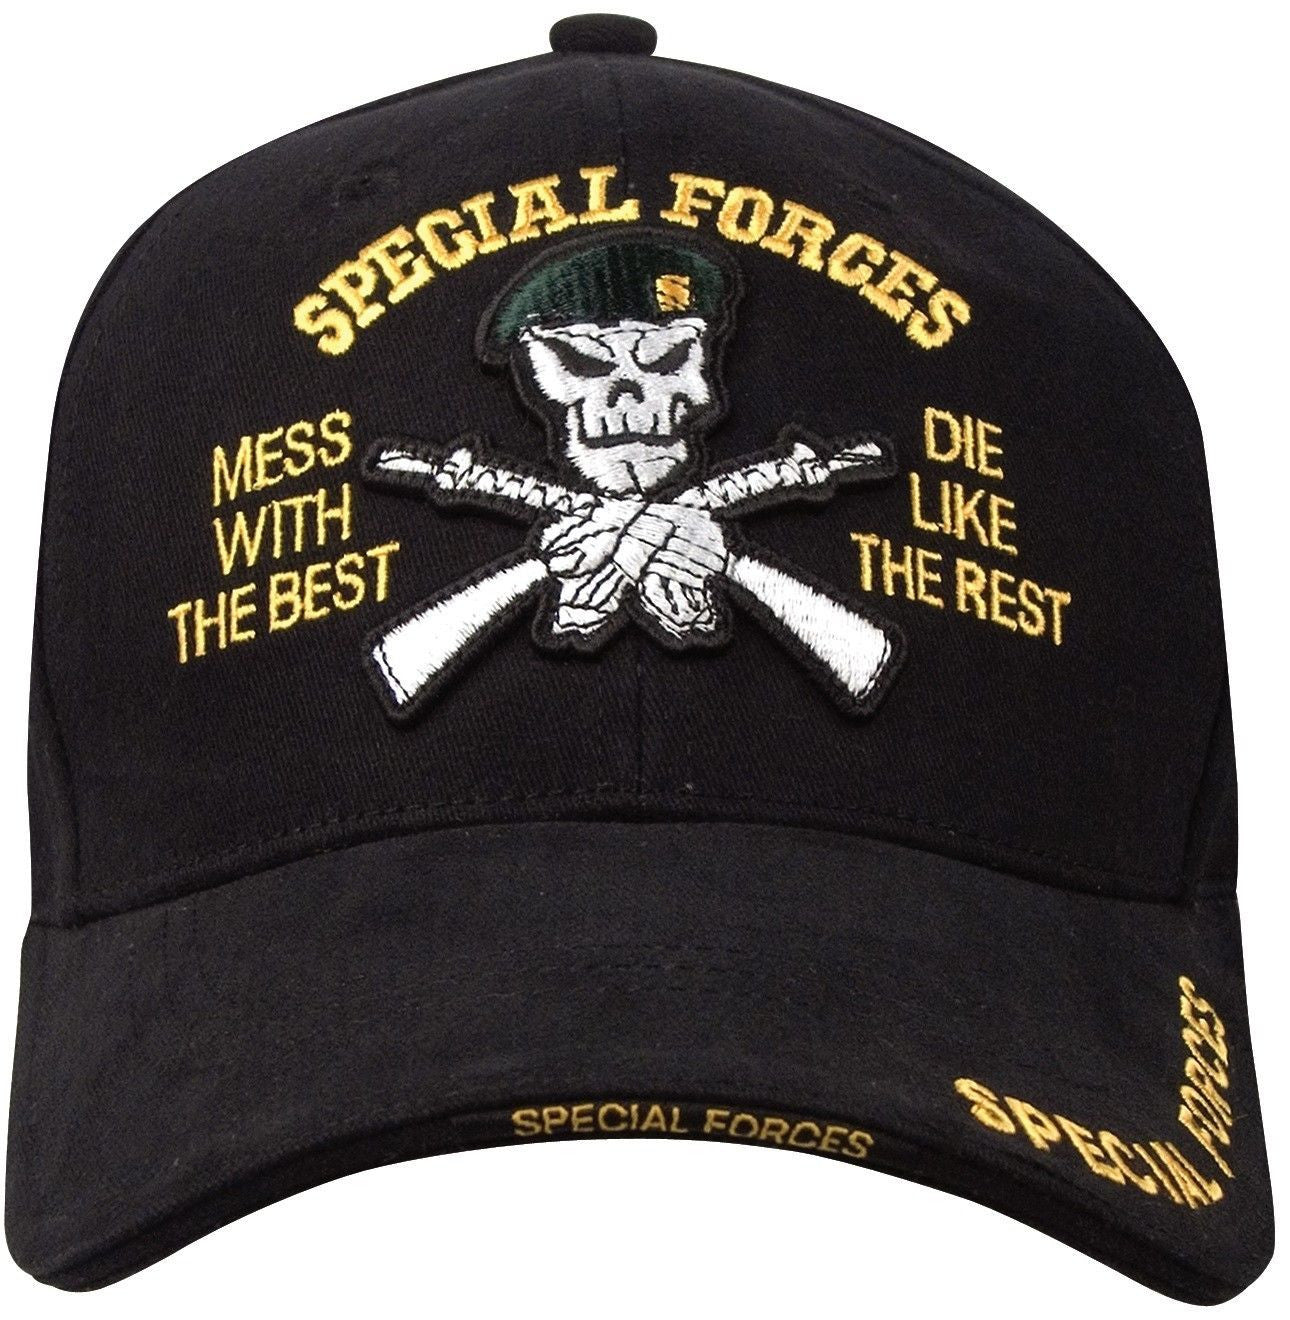 Special Forces Cap Black - Deluxe Low Profile Insignia Hat